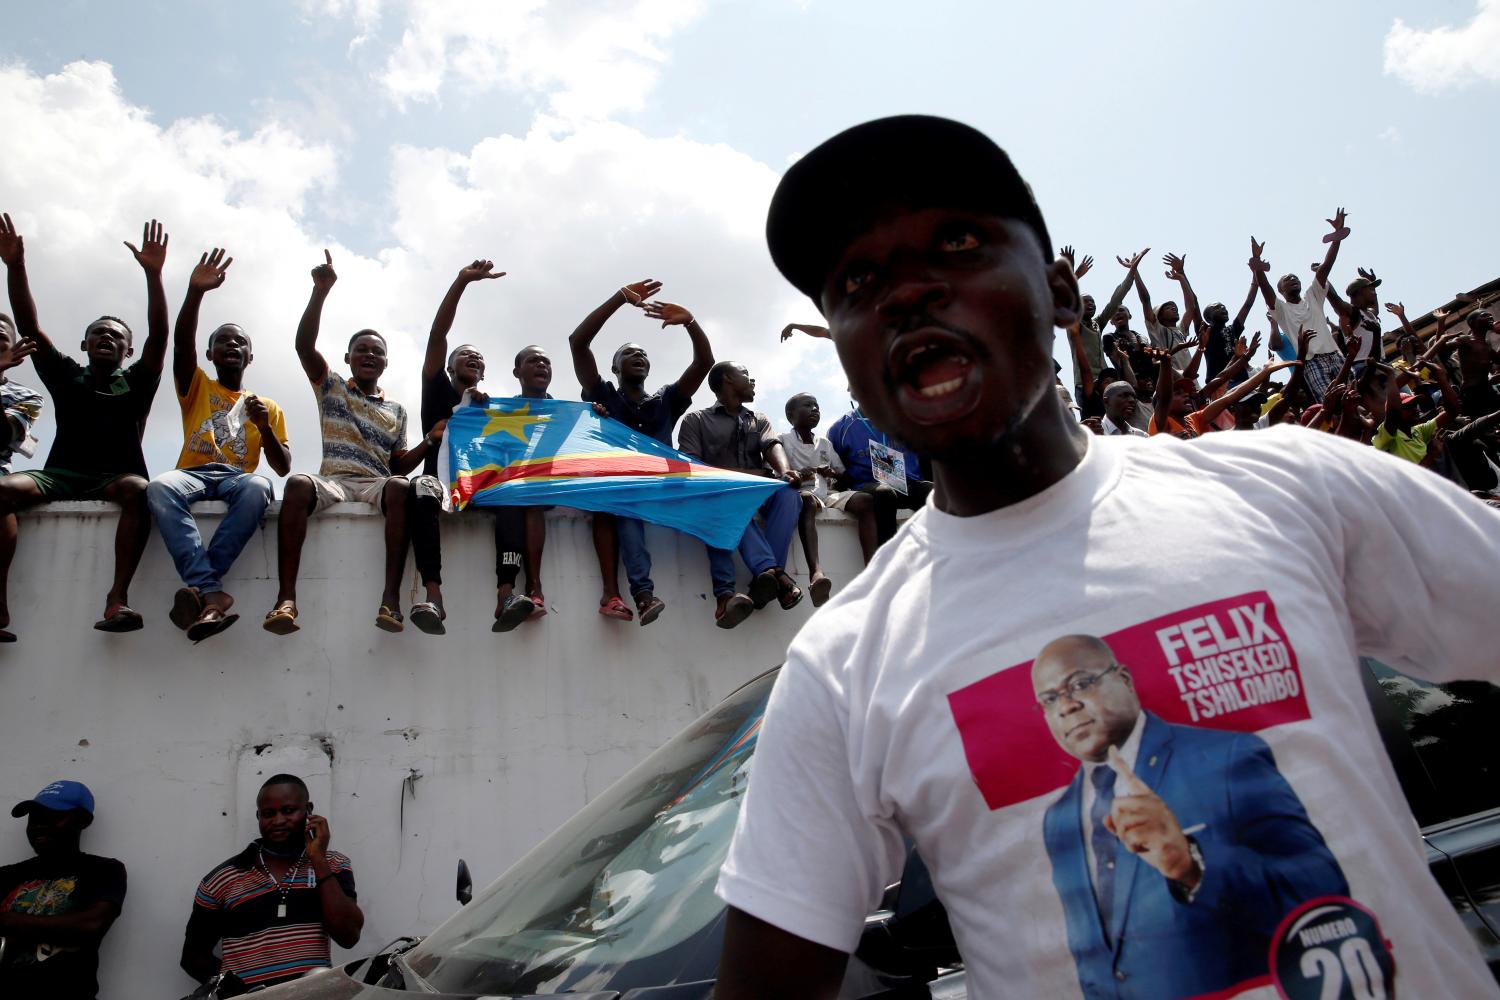 Supporters of Felix Tshisekedi, leader of Congolese main opposition party the Union for Democracy and Social Progress (UDPS), attend an election event in Kinshasa, Democratic Republic of Congo, December 21, 2018.  REUTERS/Baz Ratner - RC1FD5AB0980